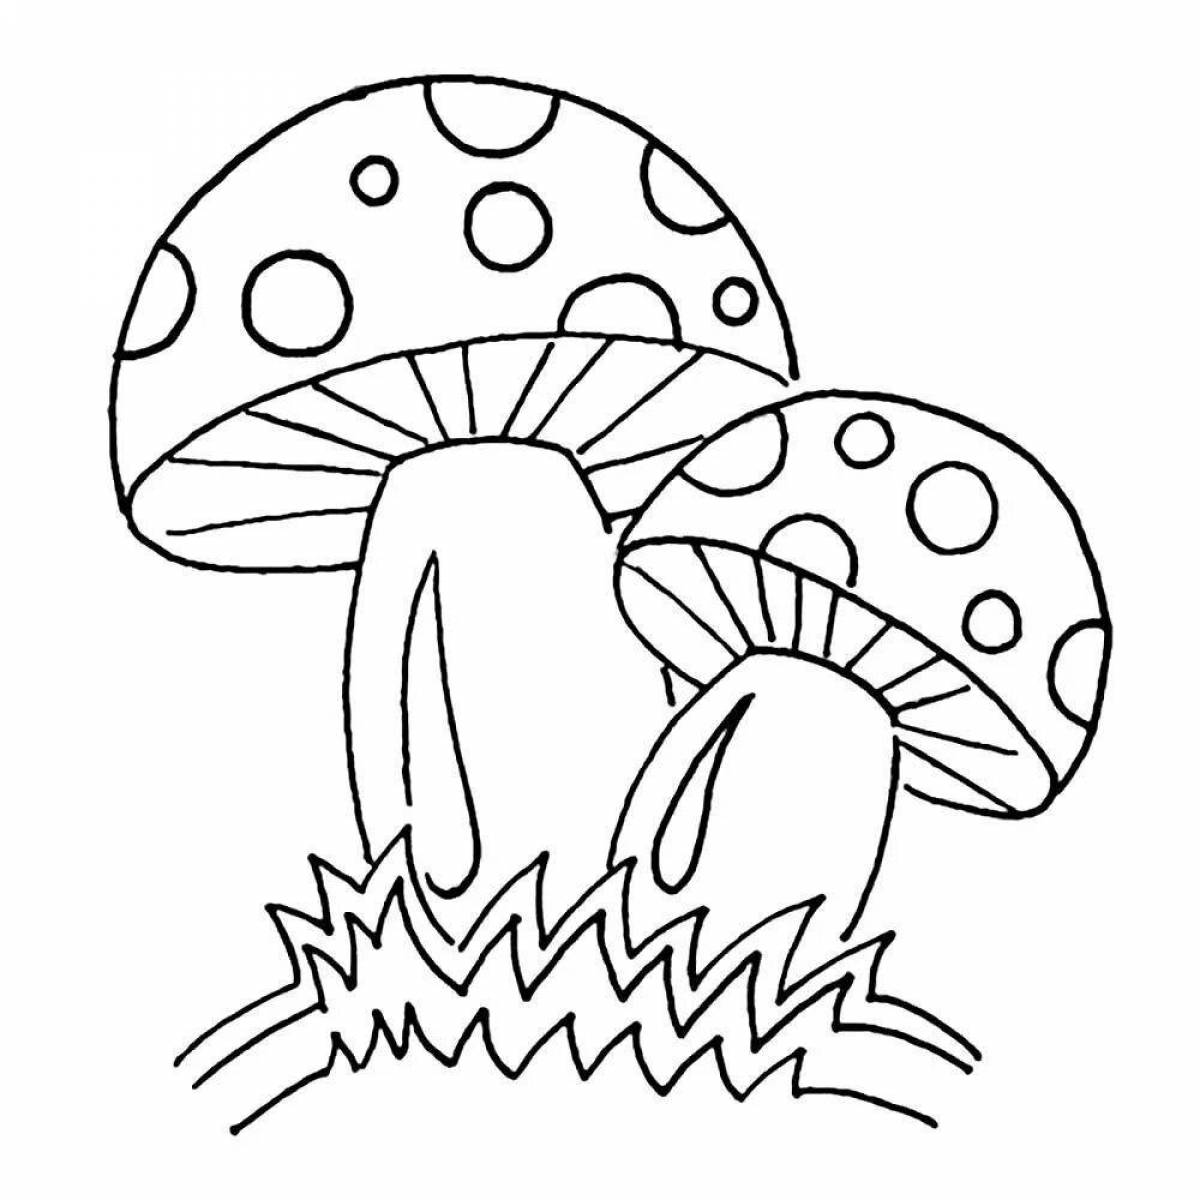 Fun coloring mushrooms for 3-4 year olds